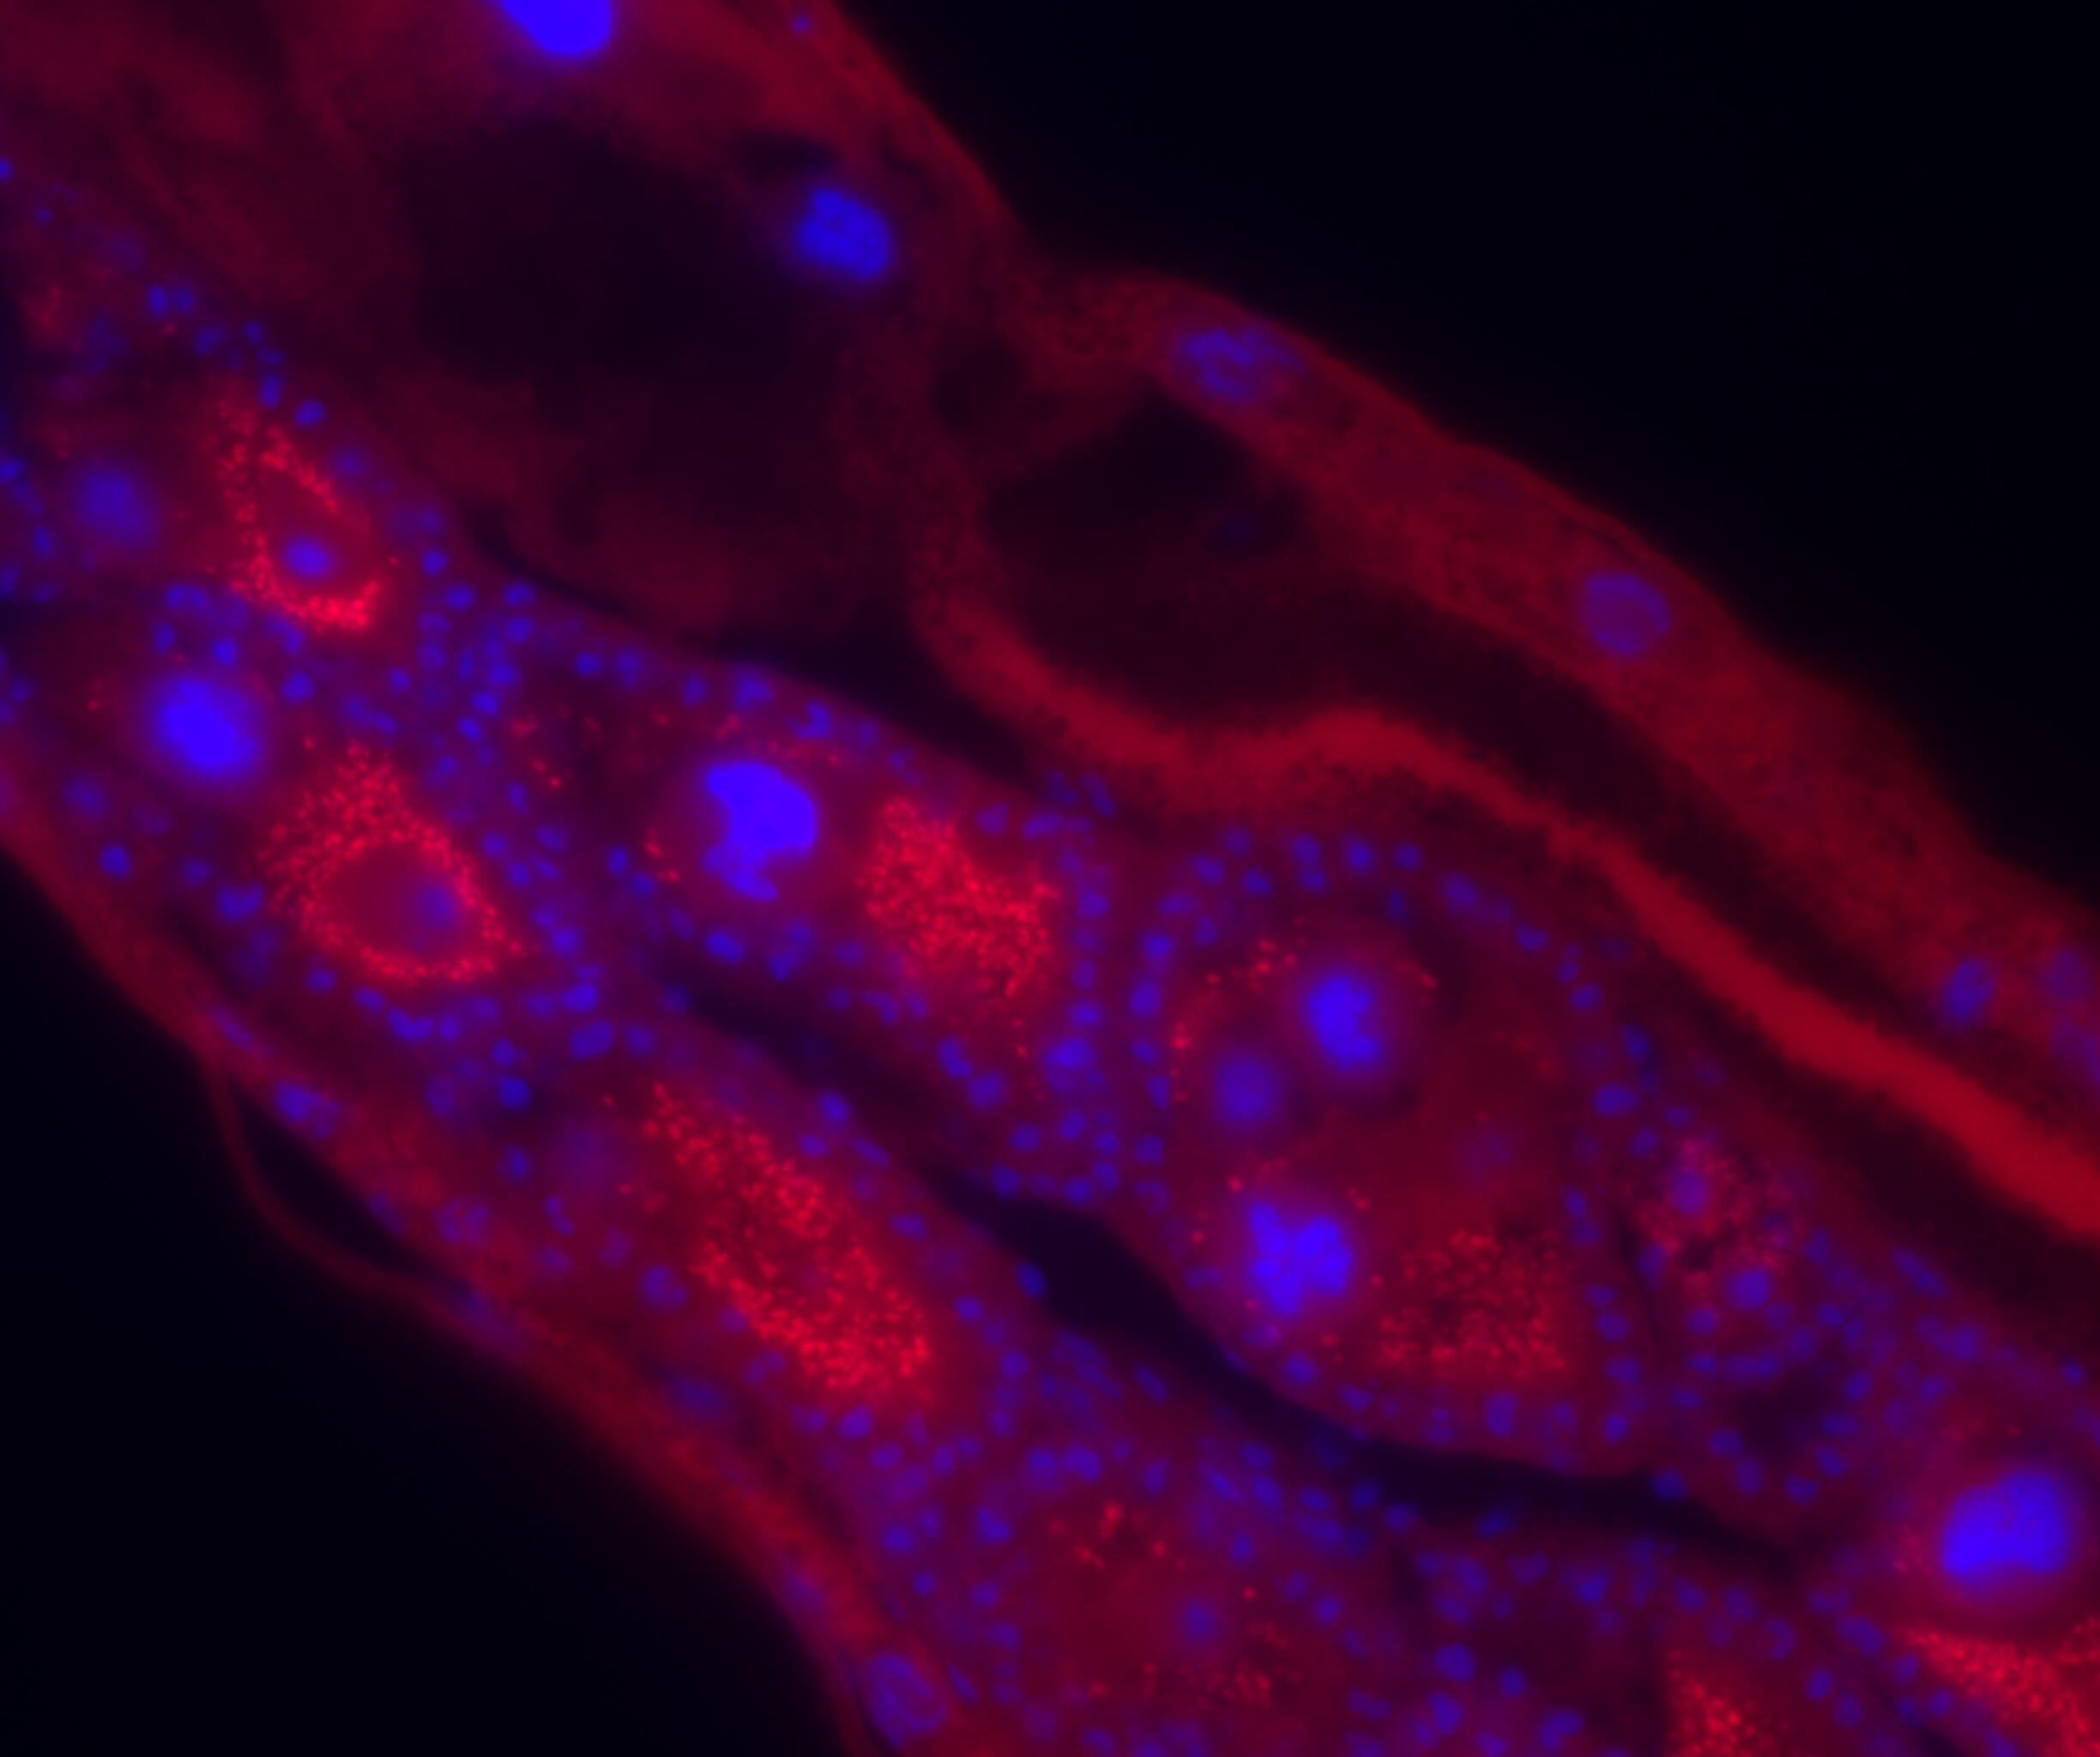 Fluorescent in situ hybridization of Wolbachia infections in Anopheles moucheti ovaries (Wolbachia – red, mosquito nuclei stained by DAPI - blue). Image taken by Shivanand Hegde.